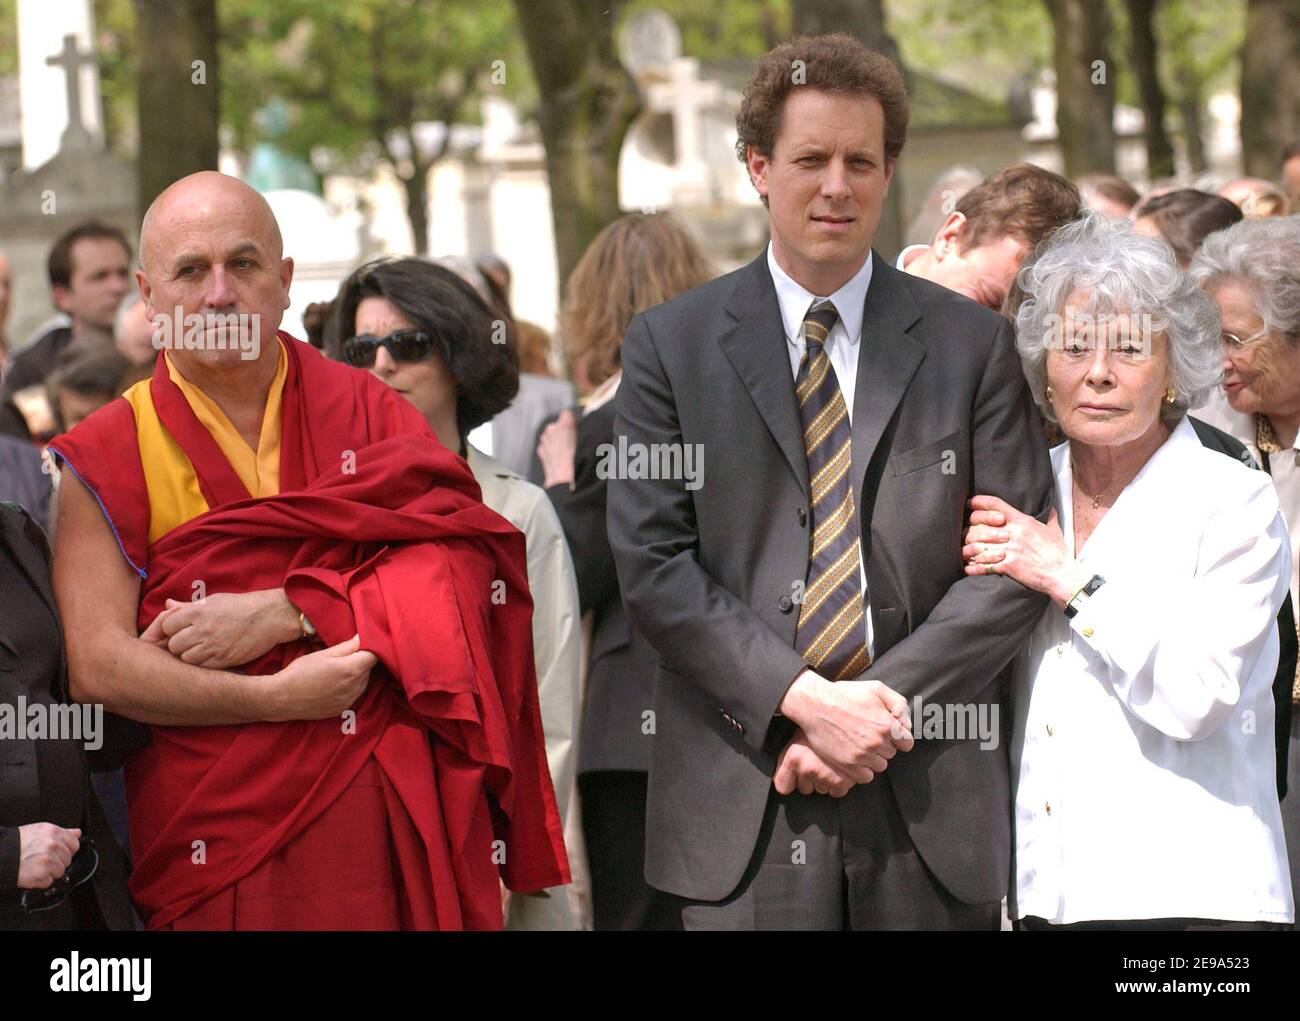 Matthieu Ricard and Claude Sarraute's family during the funeral of Jean-Francois  Revel at Montparnasse Cemetery in Paris on May 5, 2006. Photo by Bruno  Klein/ABACAPRESS.COM Stock Photo - Alamy